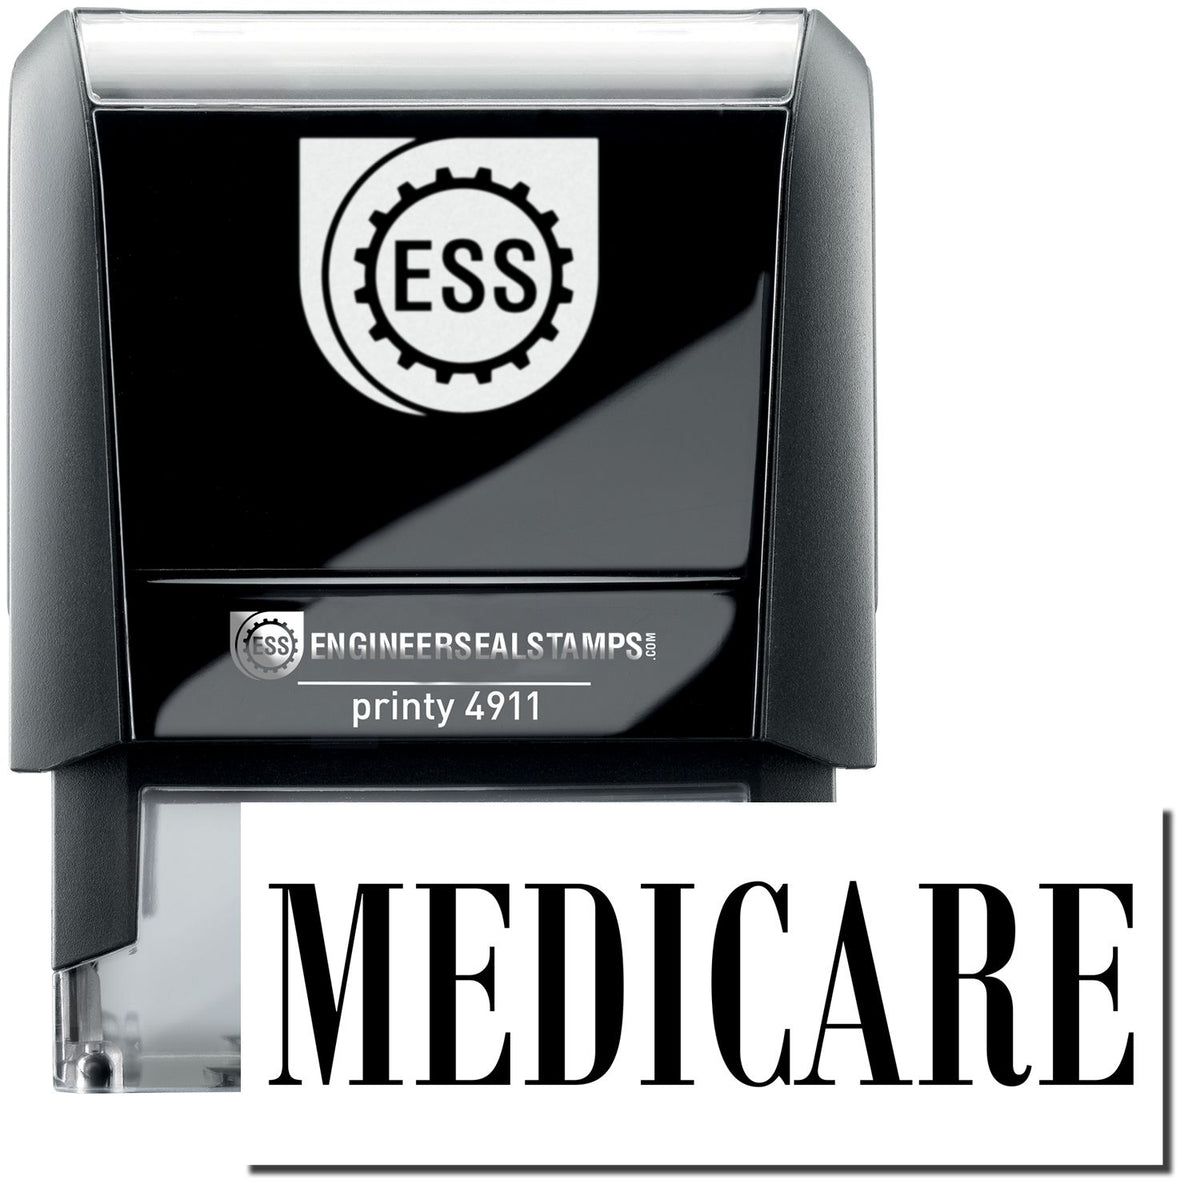 A self-inking stamp with a stamped image showing how the text &quot;MEDICARE&quot; is displayed after stamping.